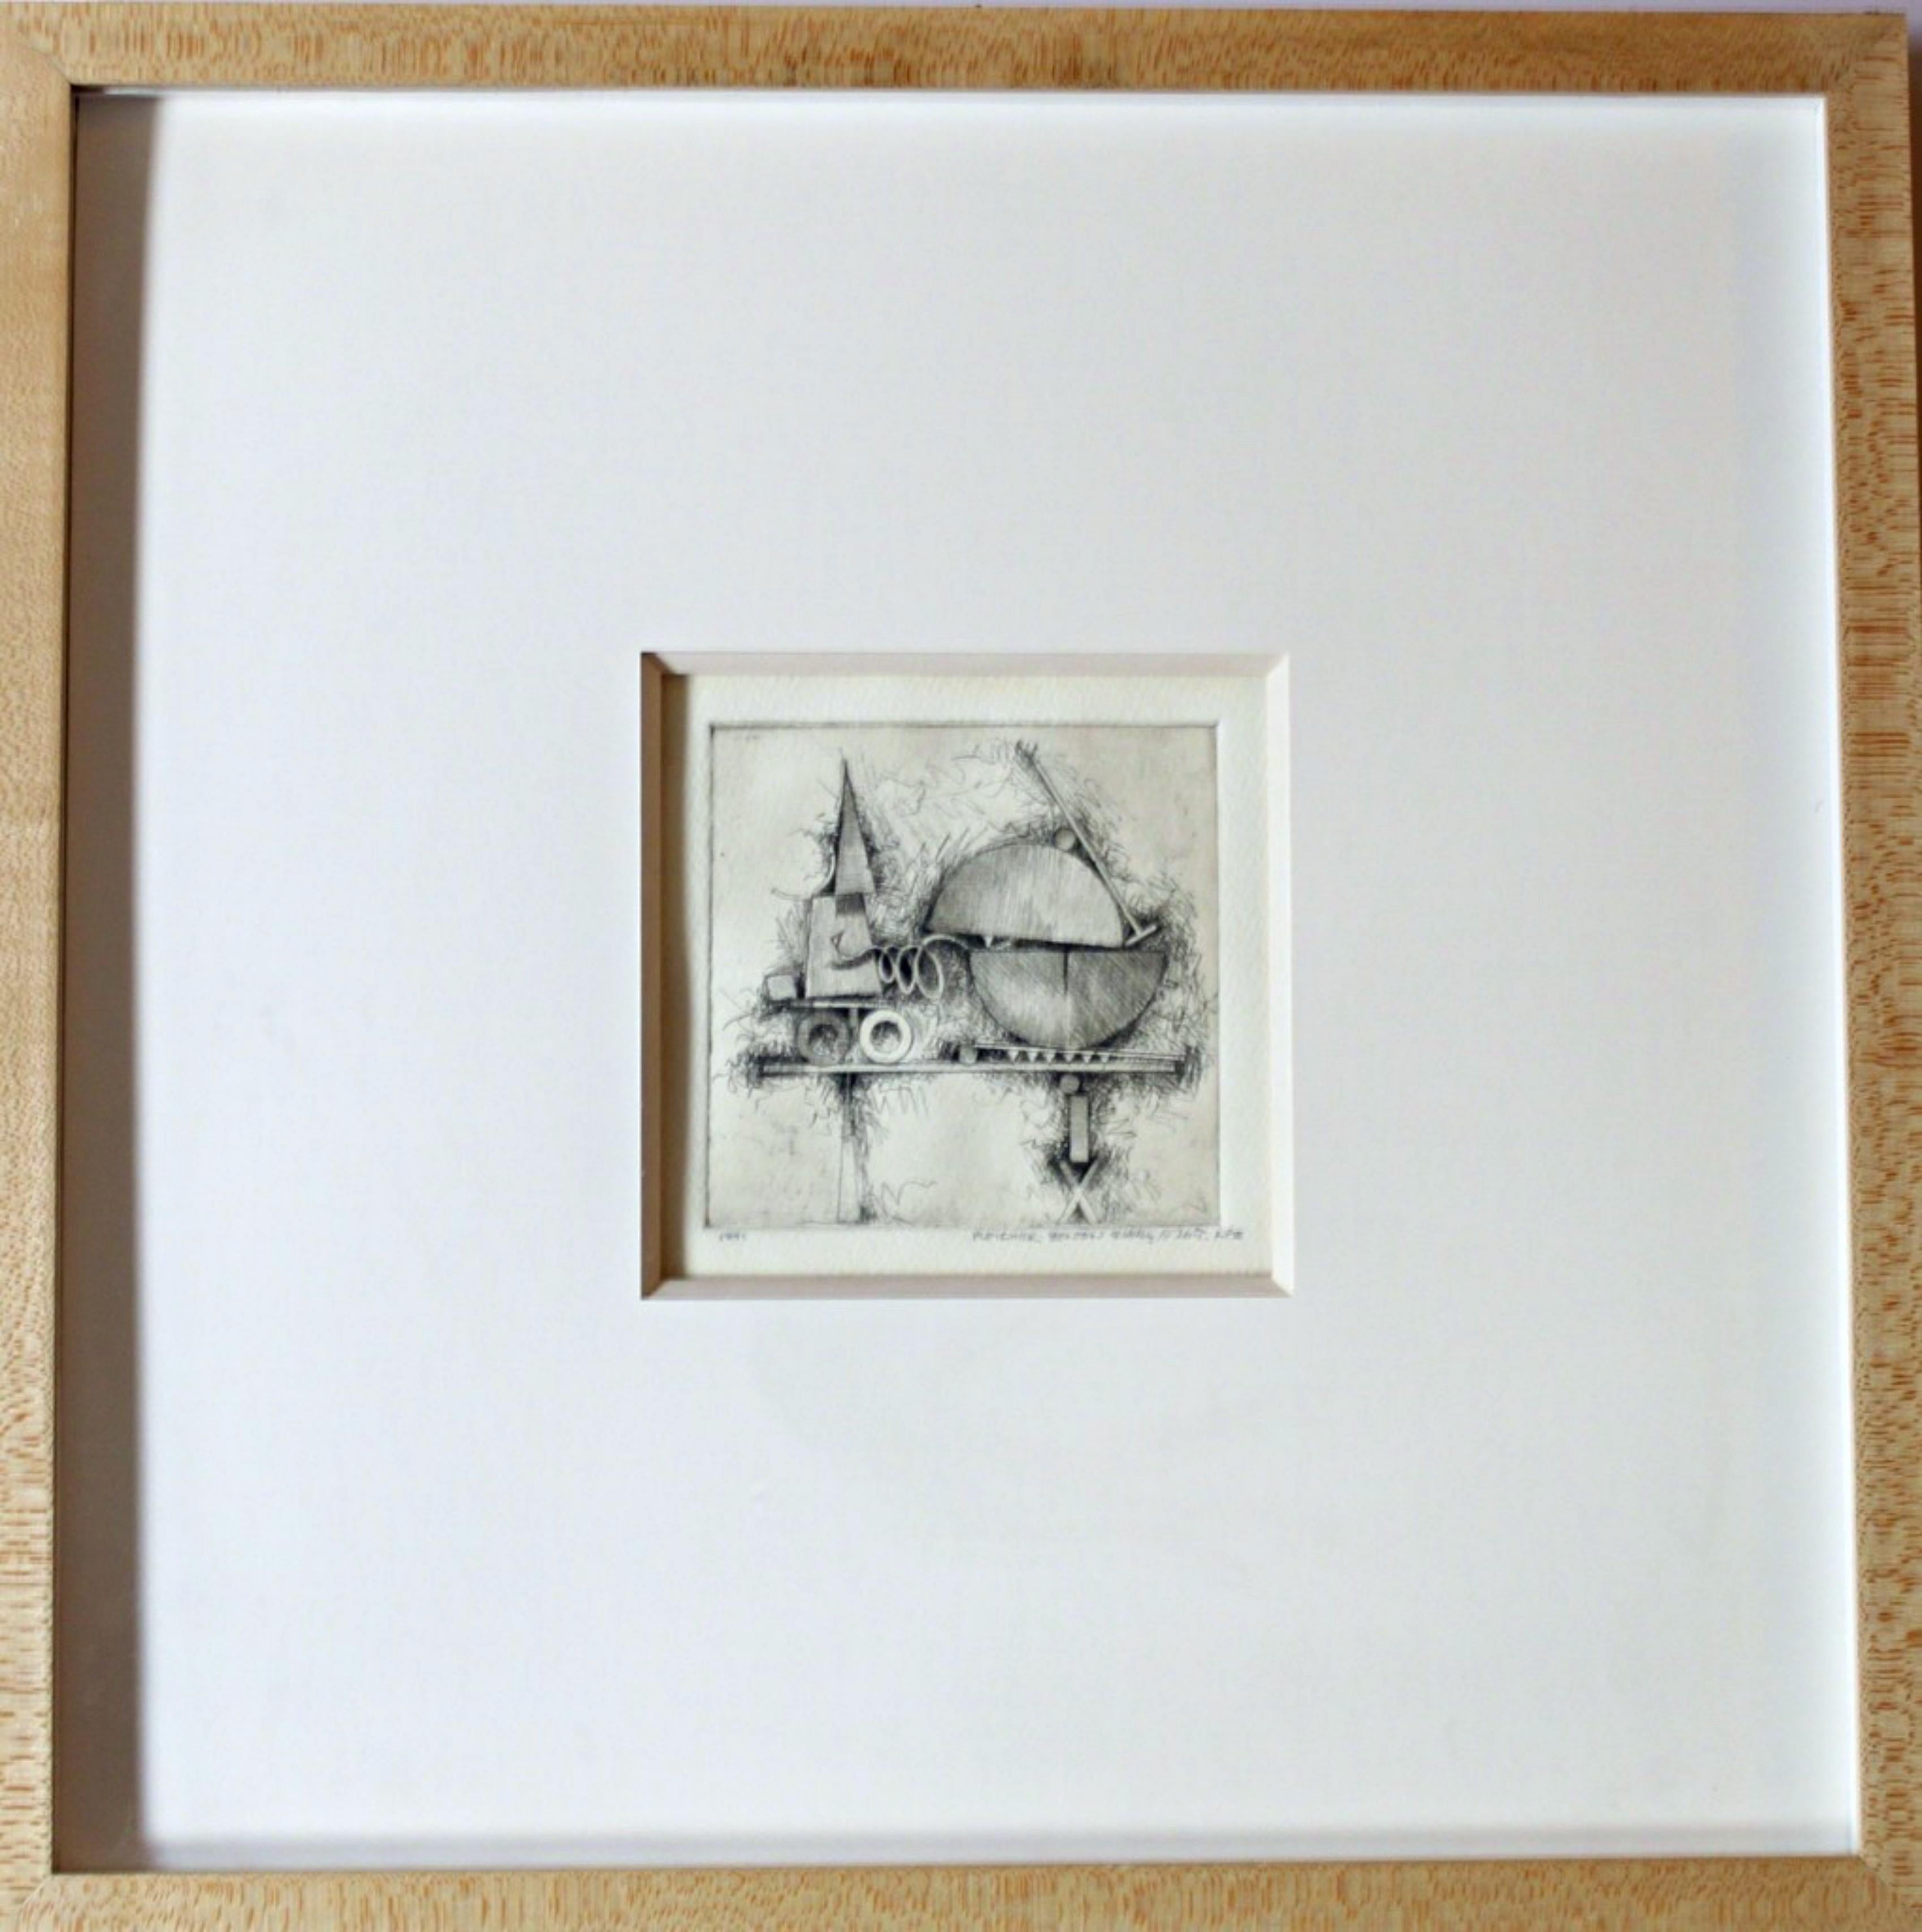 Rare constructivist etching on paper by renowned abstract modernist sculptor  - Print by Fletcher Benton